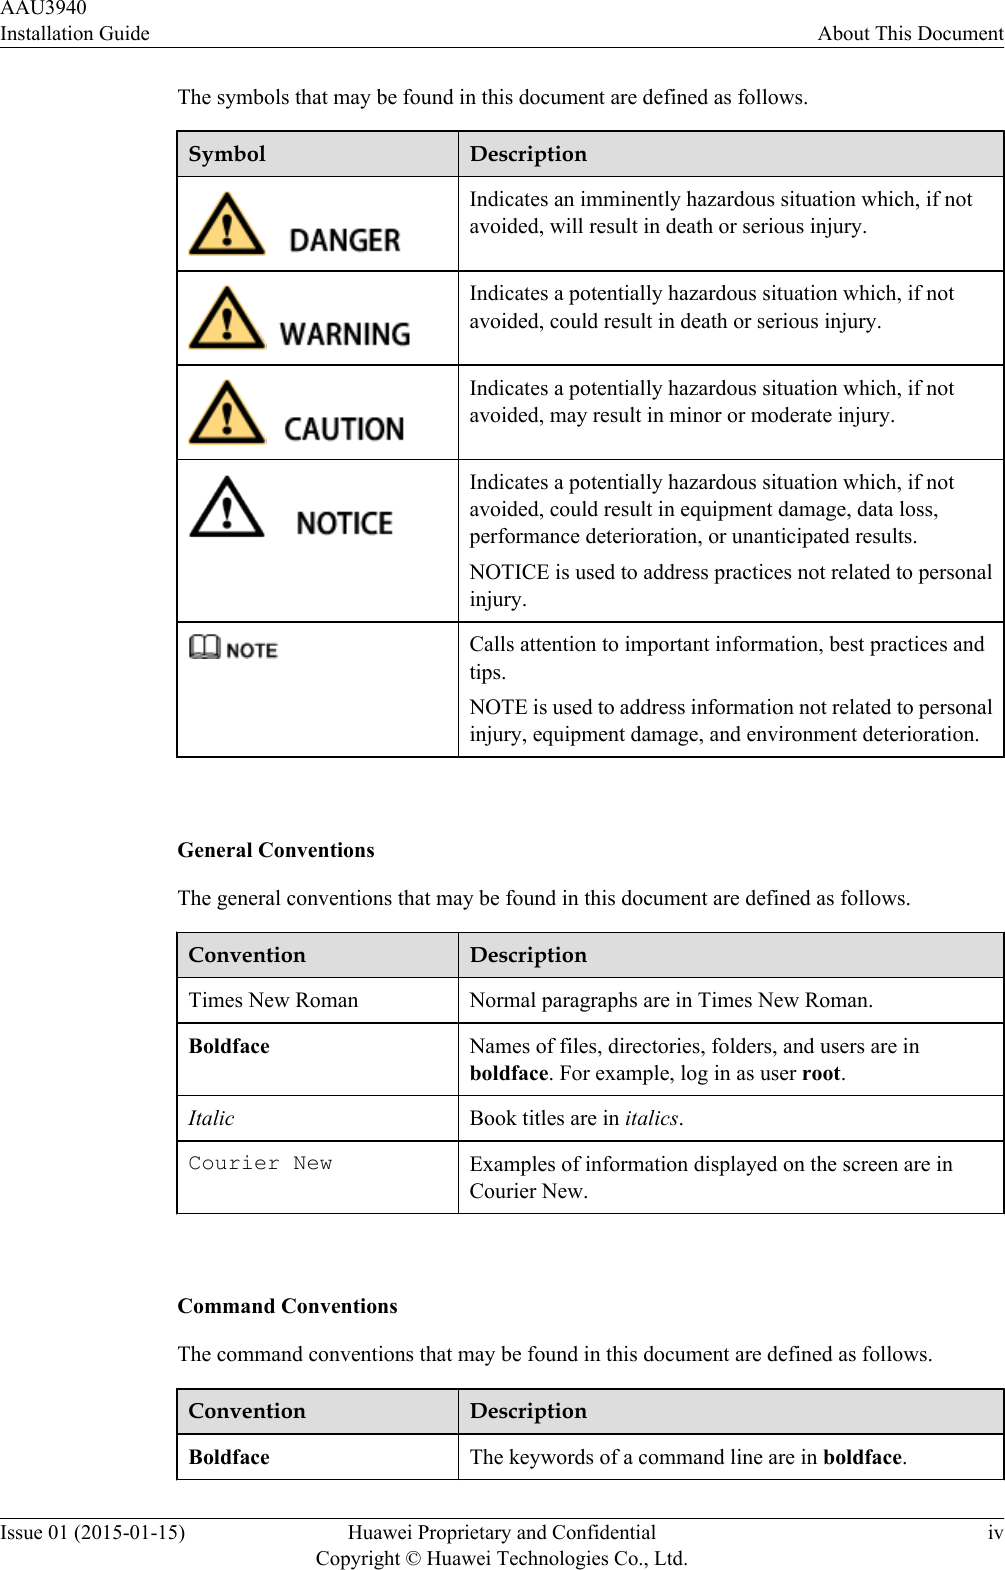 The symbols that may be found in this document are defined as follows.Symbol DescriptionIndicates an imminently hazardous situation which, if notavoided, will result in death or serious injury.Indicates a potentially hazardous situation which, if notavoided, could result in death or serious injury.Indicates a potentially hazardous situation which, if notavoided, may result in minor or moderate injury.Indicates a potentially hazardous situation which, if notavoided, could result in equipment damage, data loss,performance deterioration, or unanticipated results.NOTICE is used to address practices not related to personalinjury.Calls attention to important information, best practices andtips.NOTE is used to address information not related to personalinjury, equipment damage, and environment deterioration. General ConventionsThe general conventions that may be found in this document are defined as follows.Convention DescriptionTimes New Roman Normal paragraphs are in Times New Roman.Boldface Names of files, directories, folders, and users are inboldface. For example, log in as user root.Italic Book titles are in italics.Courier New Examples of information displayed on the screen are inCourier New. Command ConventionsThe command conventions that may be found in this document are defined as follows.Convention DescriptionBoldface The keywords of a command line are in boldface.AAU3940Installation Guide About This DocumentIssue 01 (2015-01-15) Huawei Proprietary and ConfidentialCopyright © Huawei Technologies Co., Ltd.iv